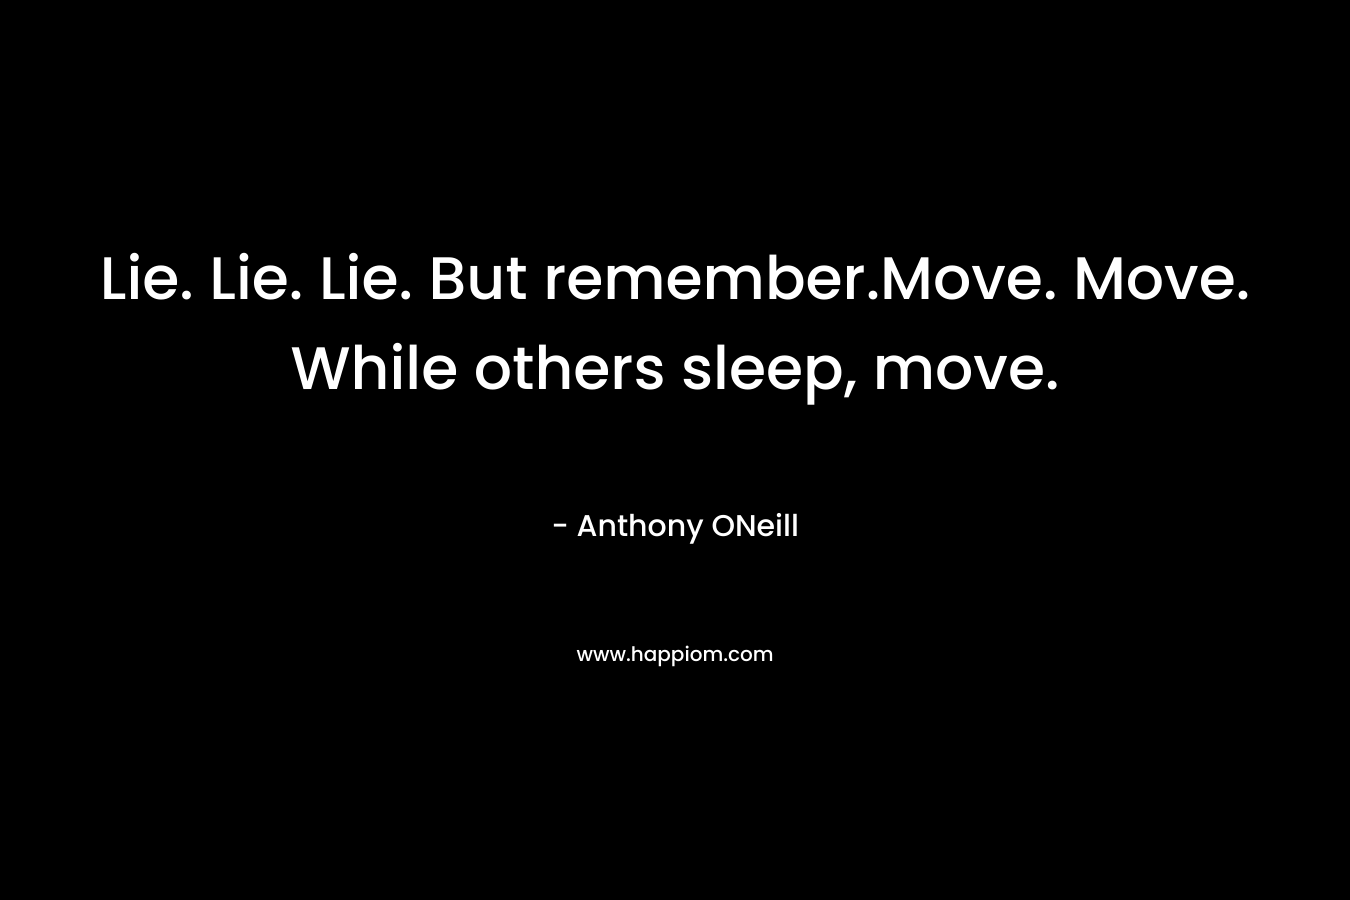 Lie. Lie. Lie. But remember.Move. Move. While others sleep, move.